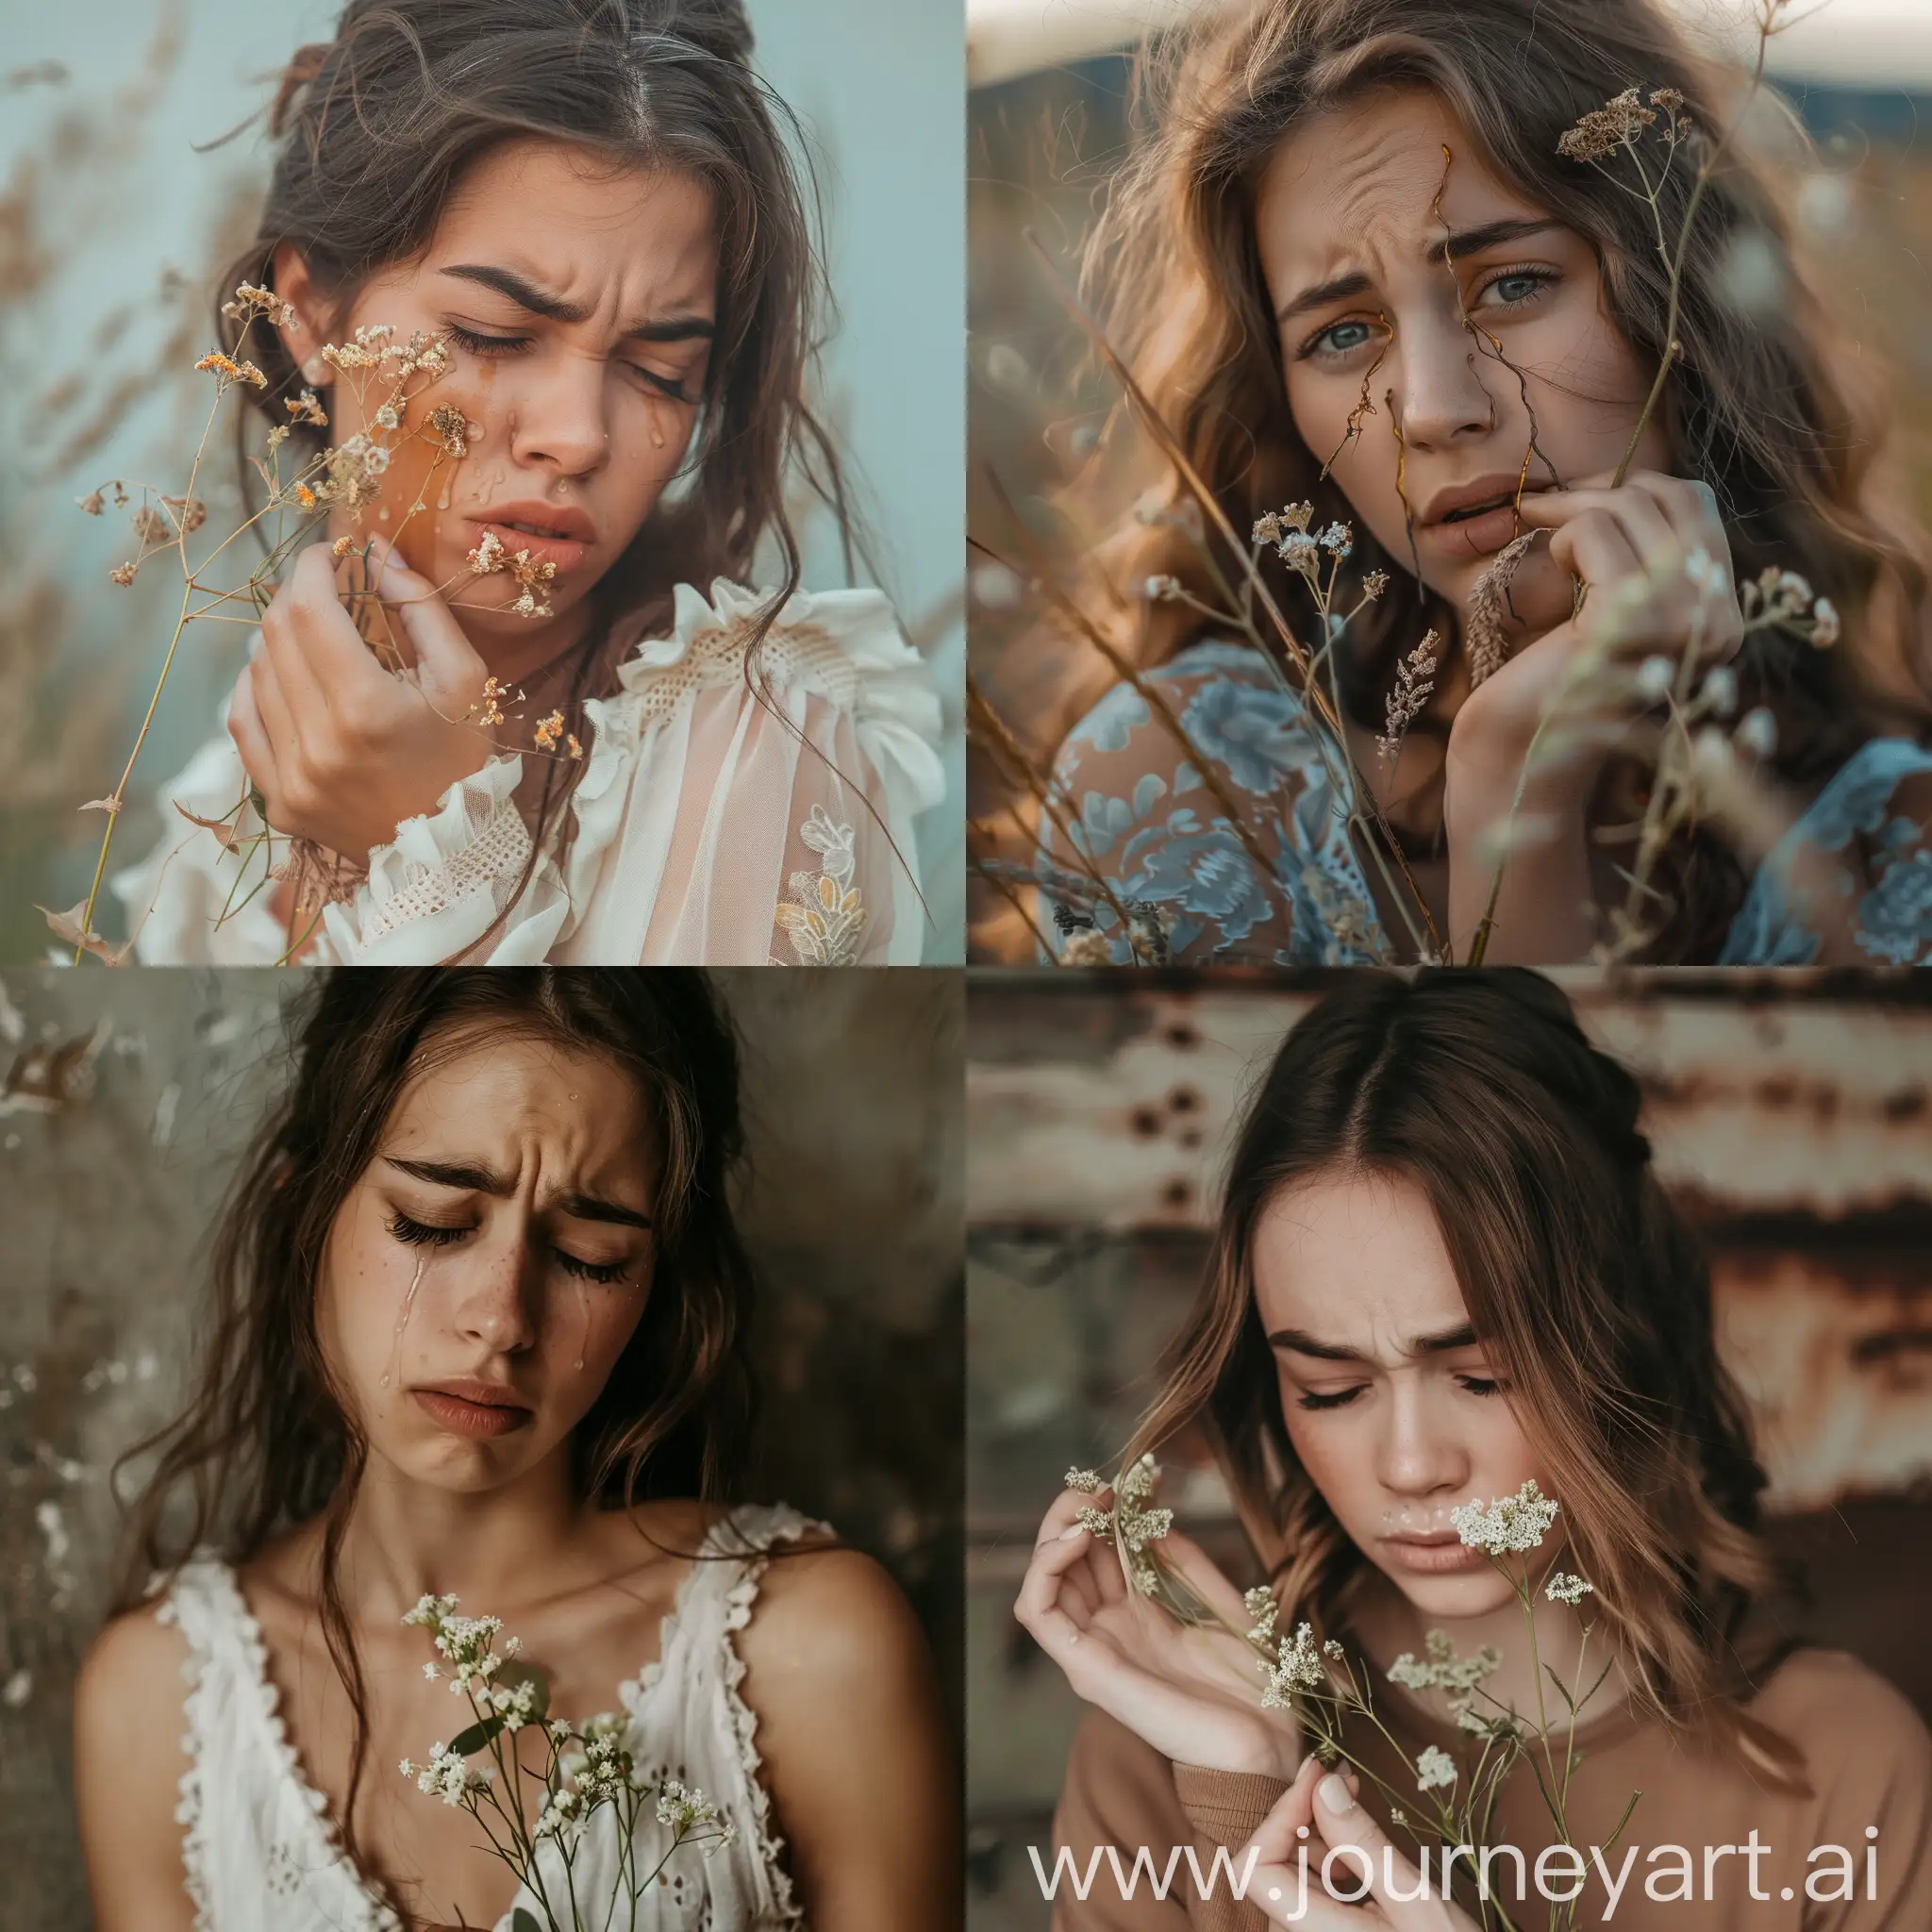 Young beautiful woman holding dying flowers crying emotionally